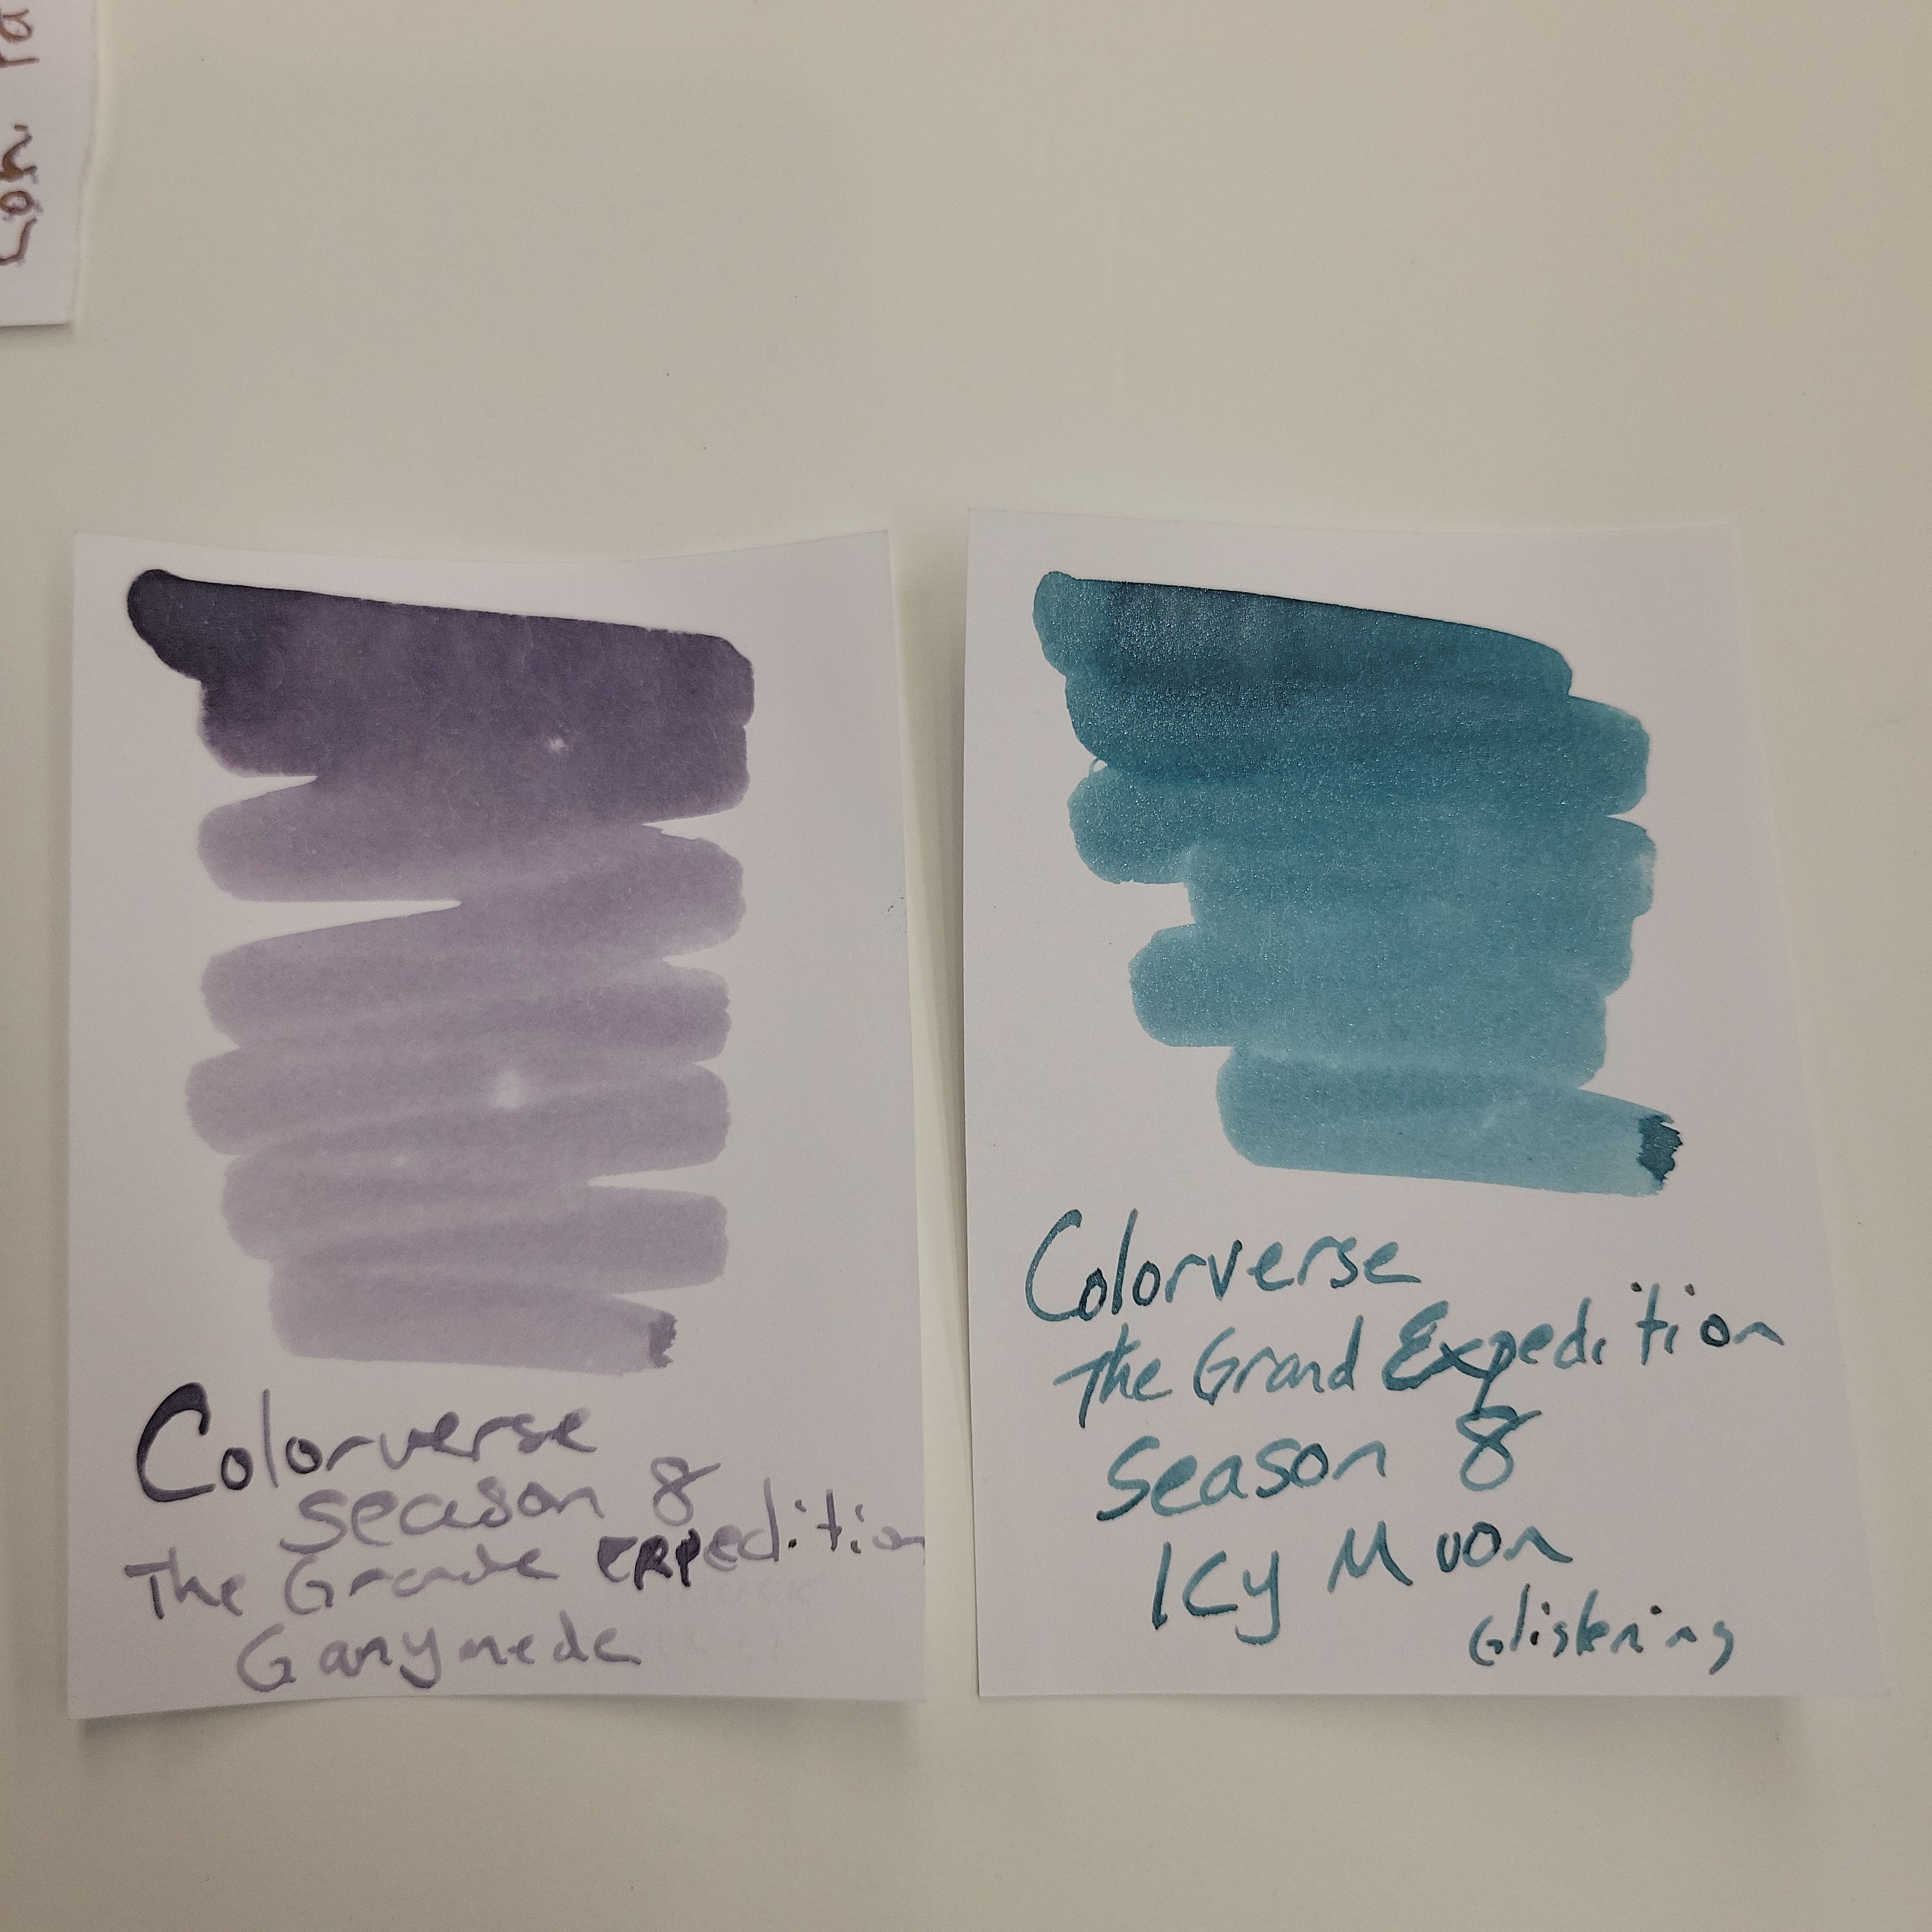 Colorverse Ink - Grand Expedition - Ganymede & Icy Moon Colorverse